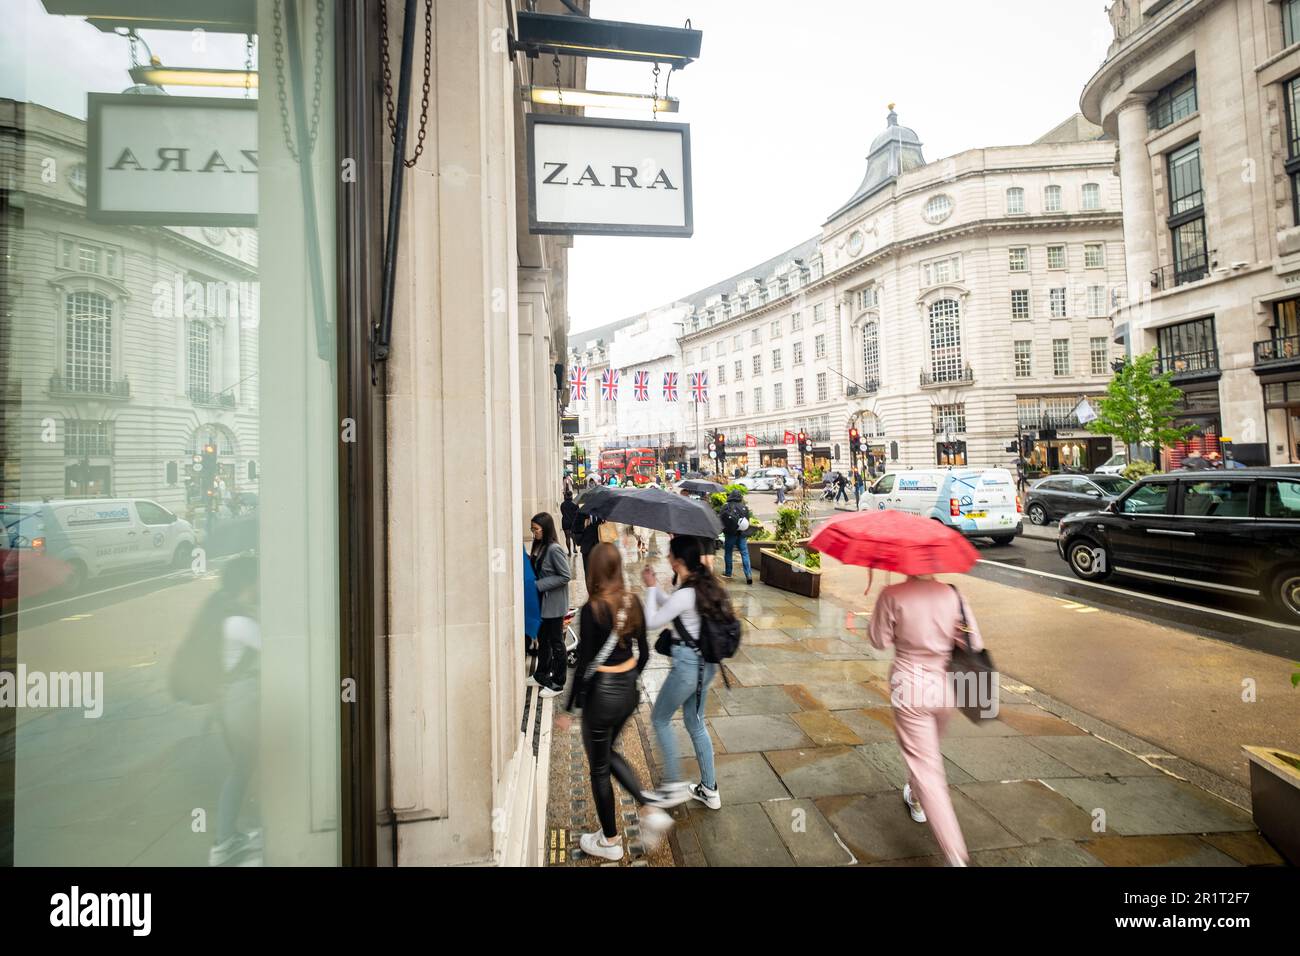 London- May 2023: Zara store signage on Regent Street store, a fast fashion retailer with branches across the UK Stock Photo